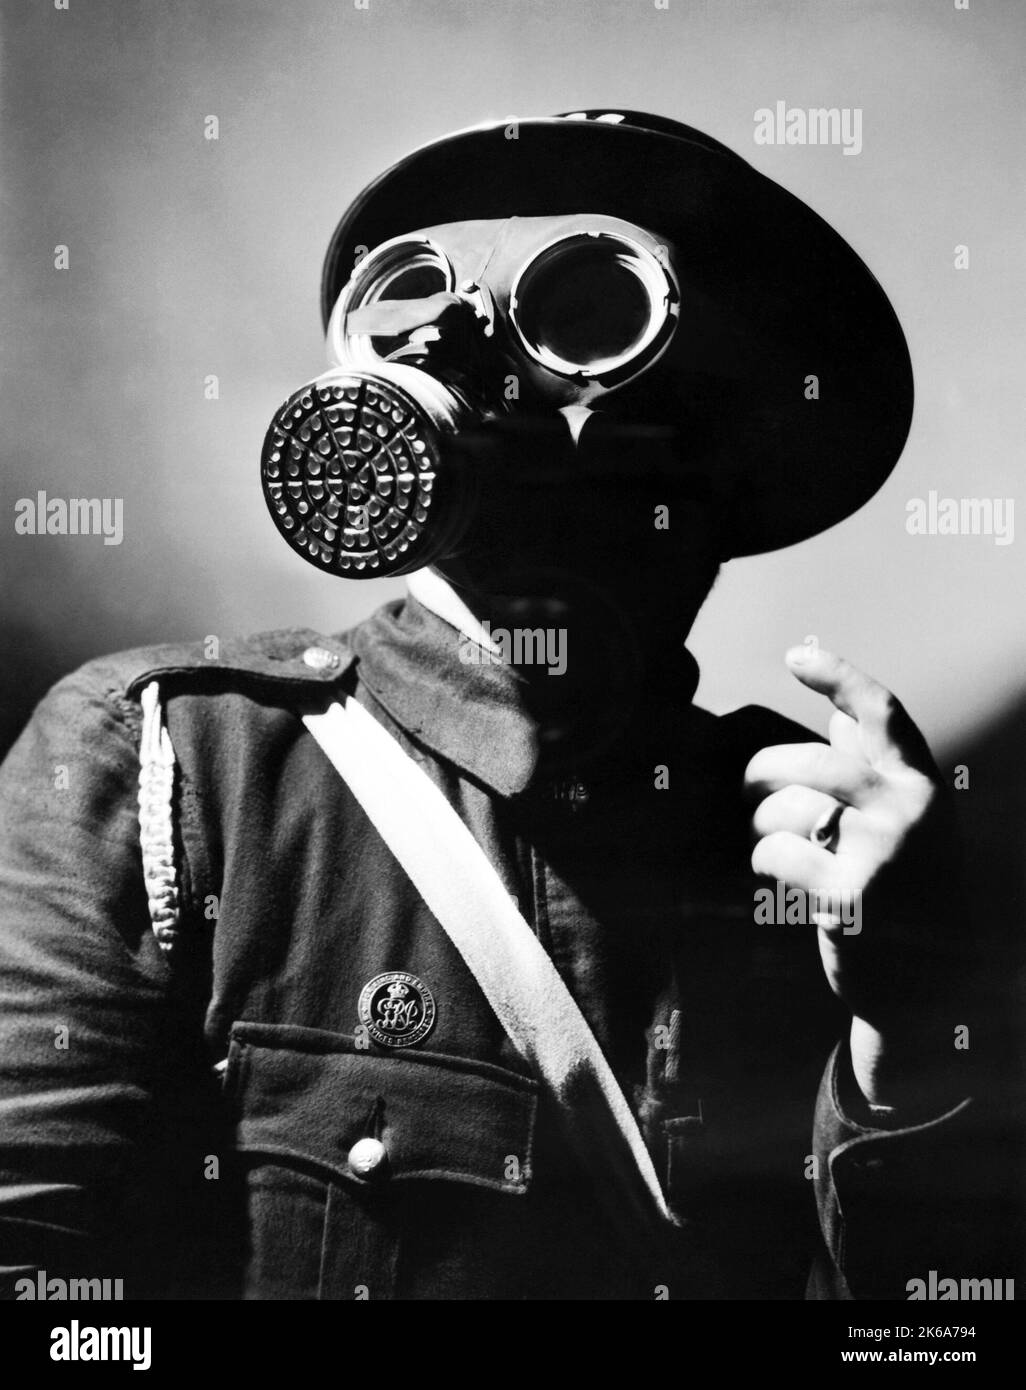 Portrait of an Air Raid Warden wearing a steel helmet and gas mask during World War II. Stock Photo